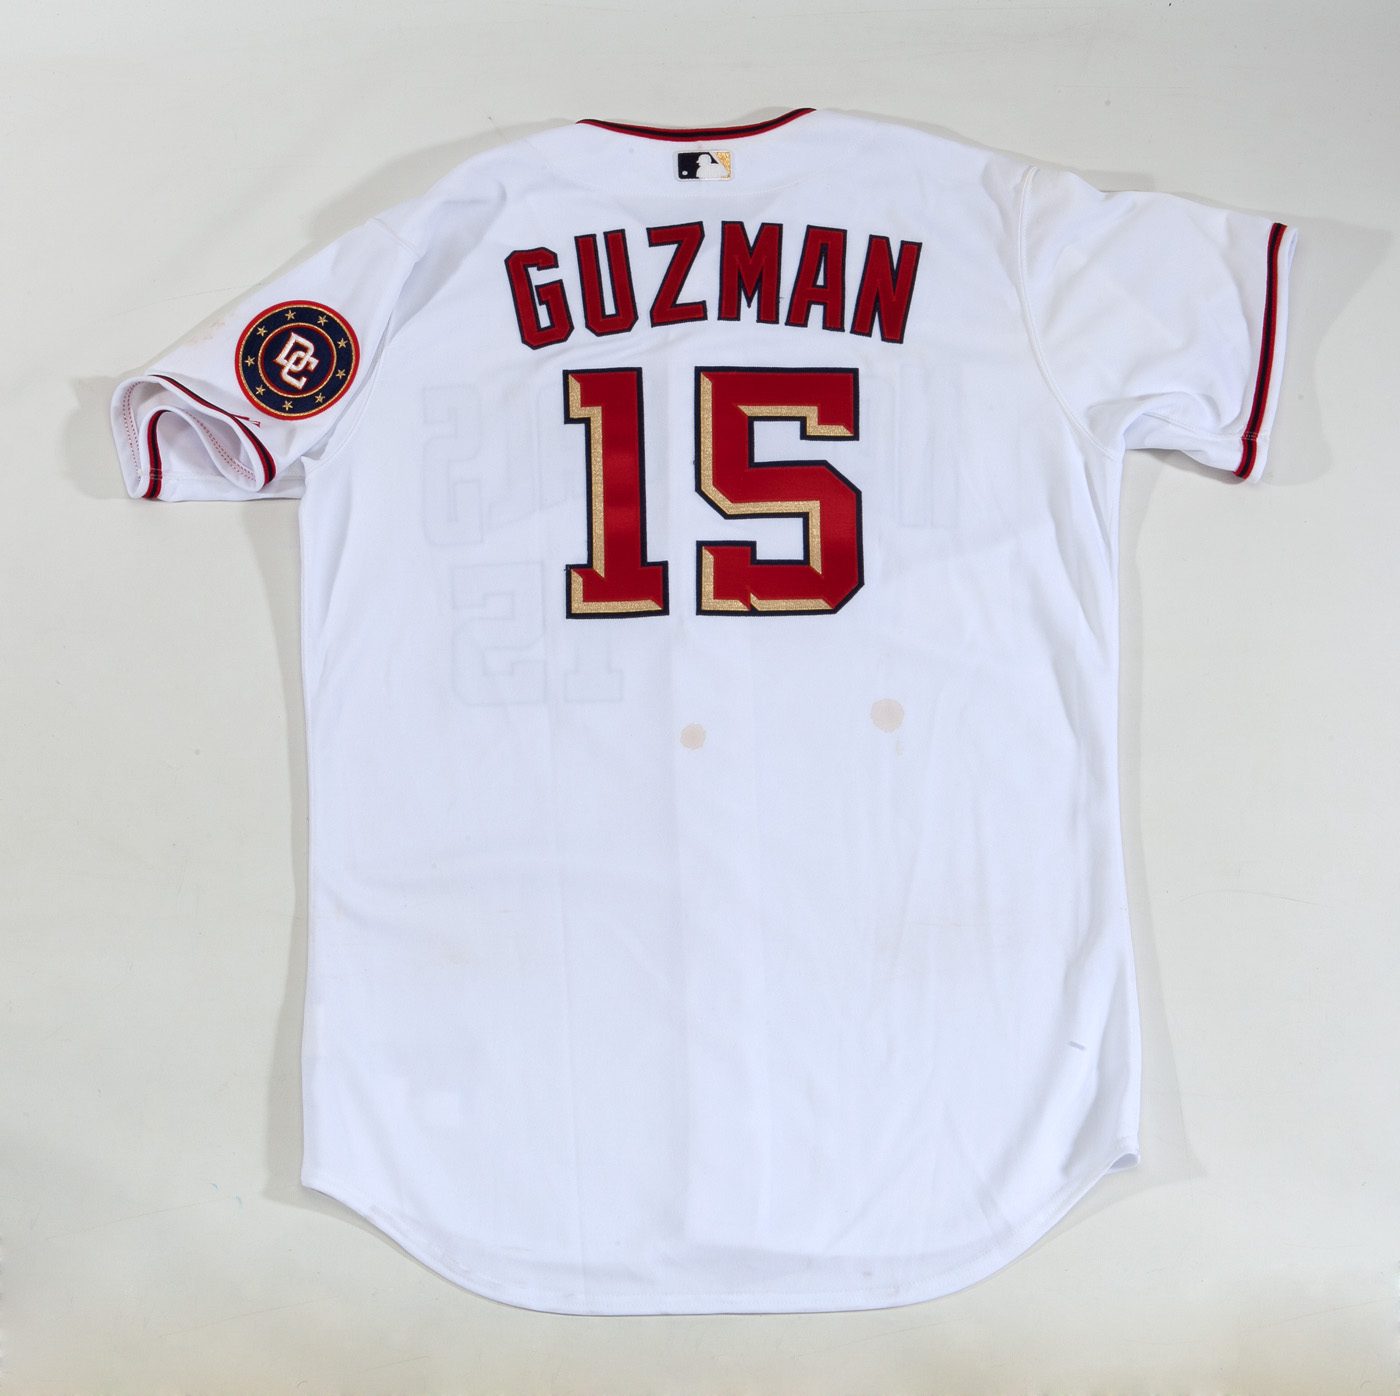 nationals opening day jersey